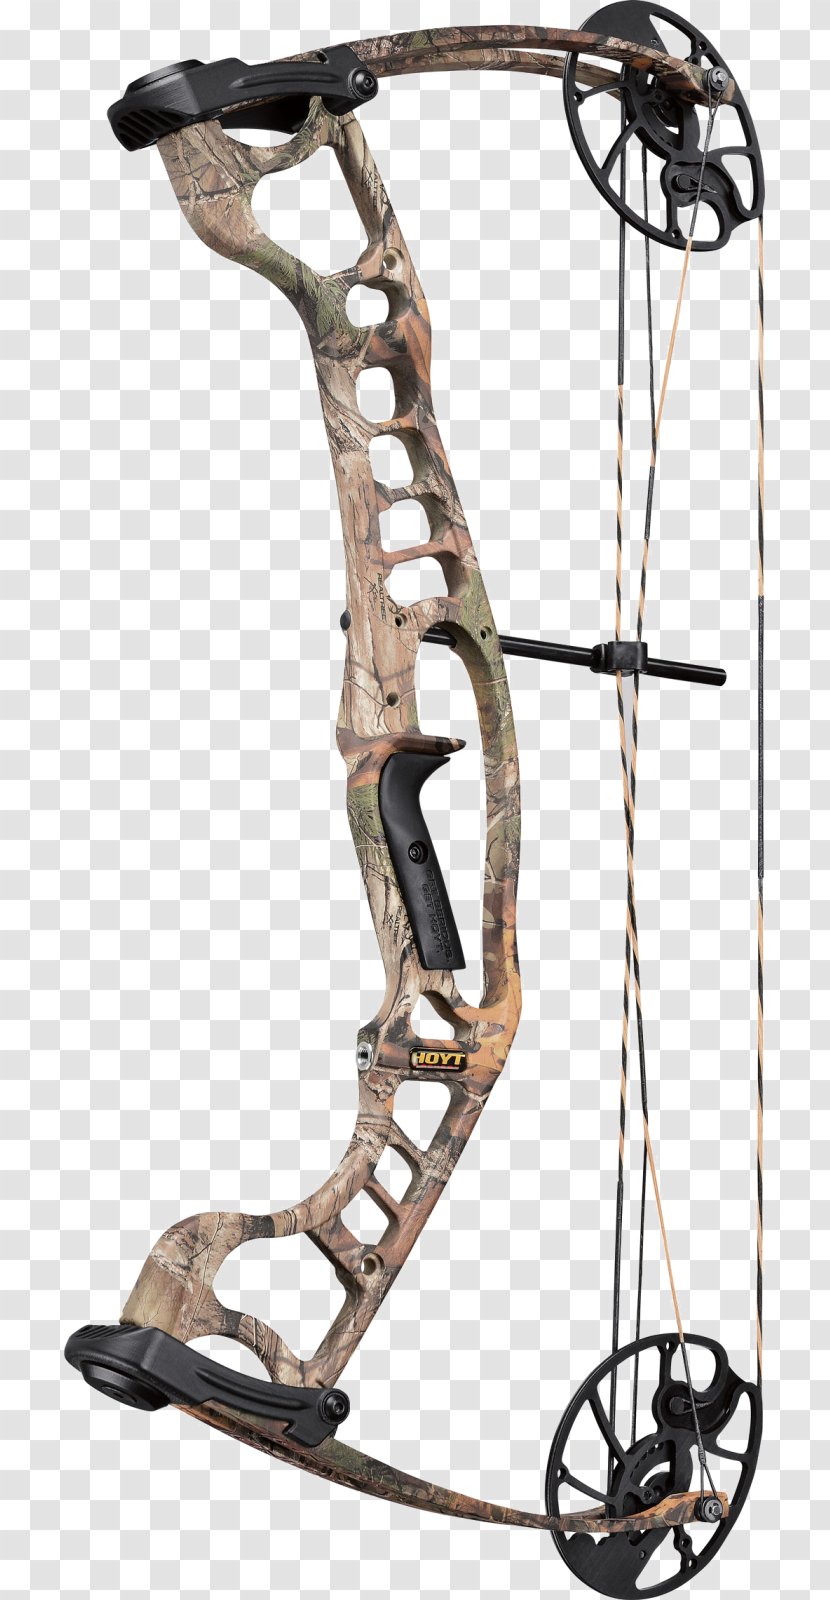 Compound Bows Bow And Arrow Bowhunting Recurve - Quiver Transparent PNG